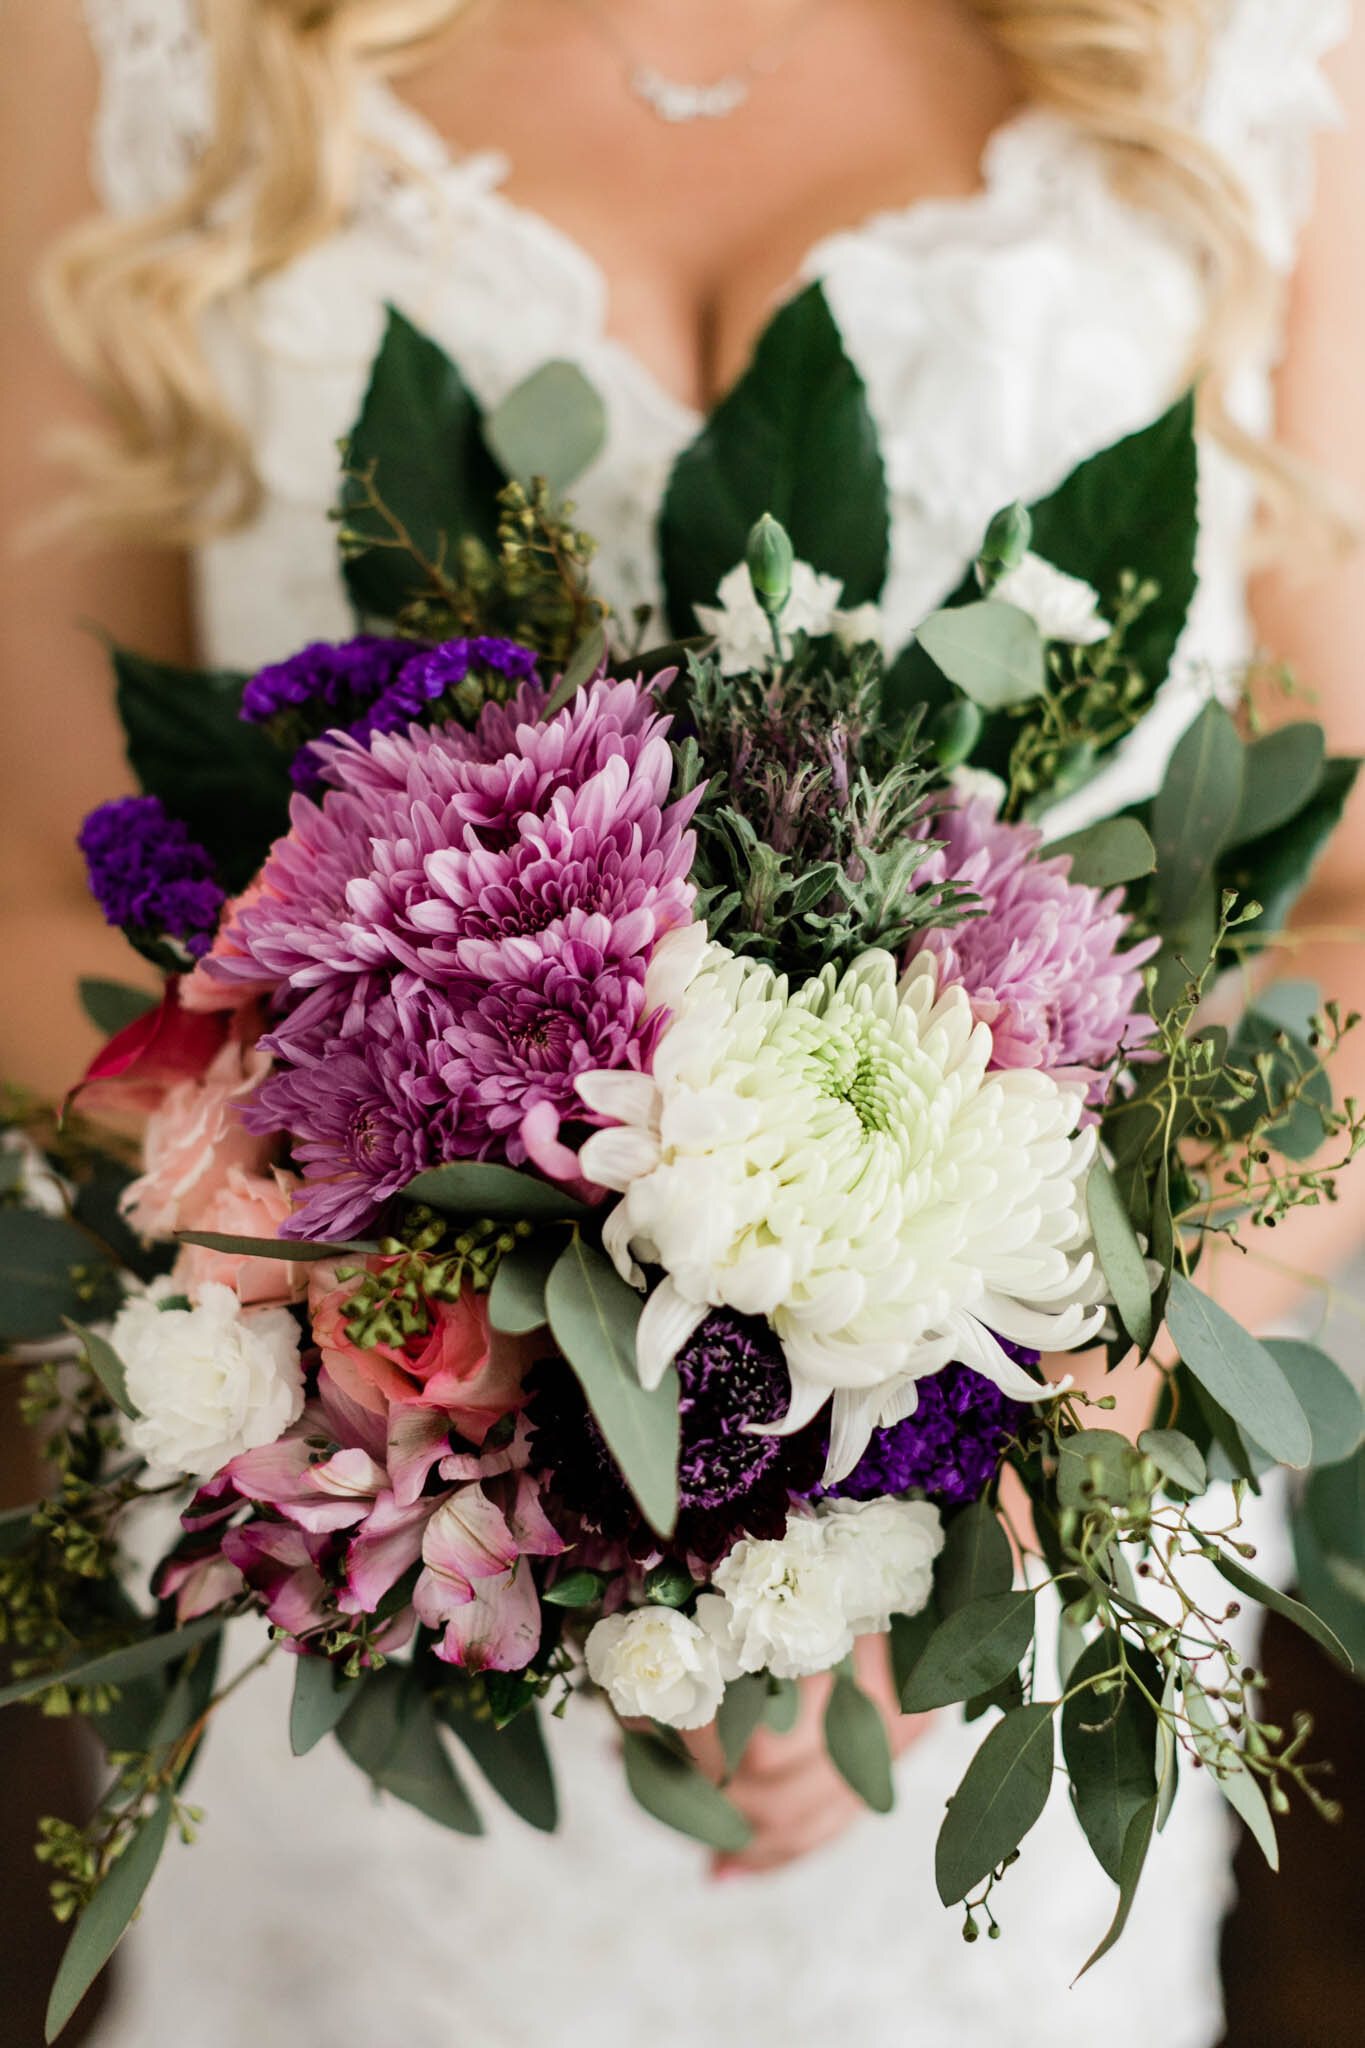 Durham Wedding Photographer | By G. Lin Photography | Bridal bouquet with purple and white flowers